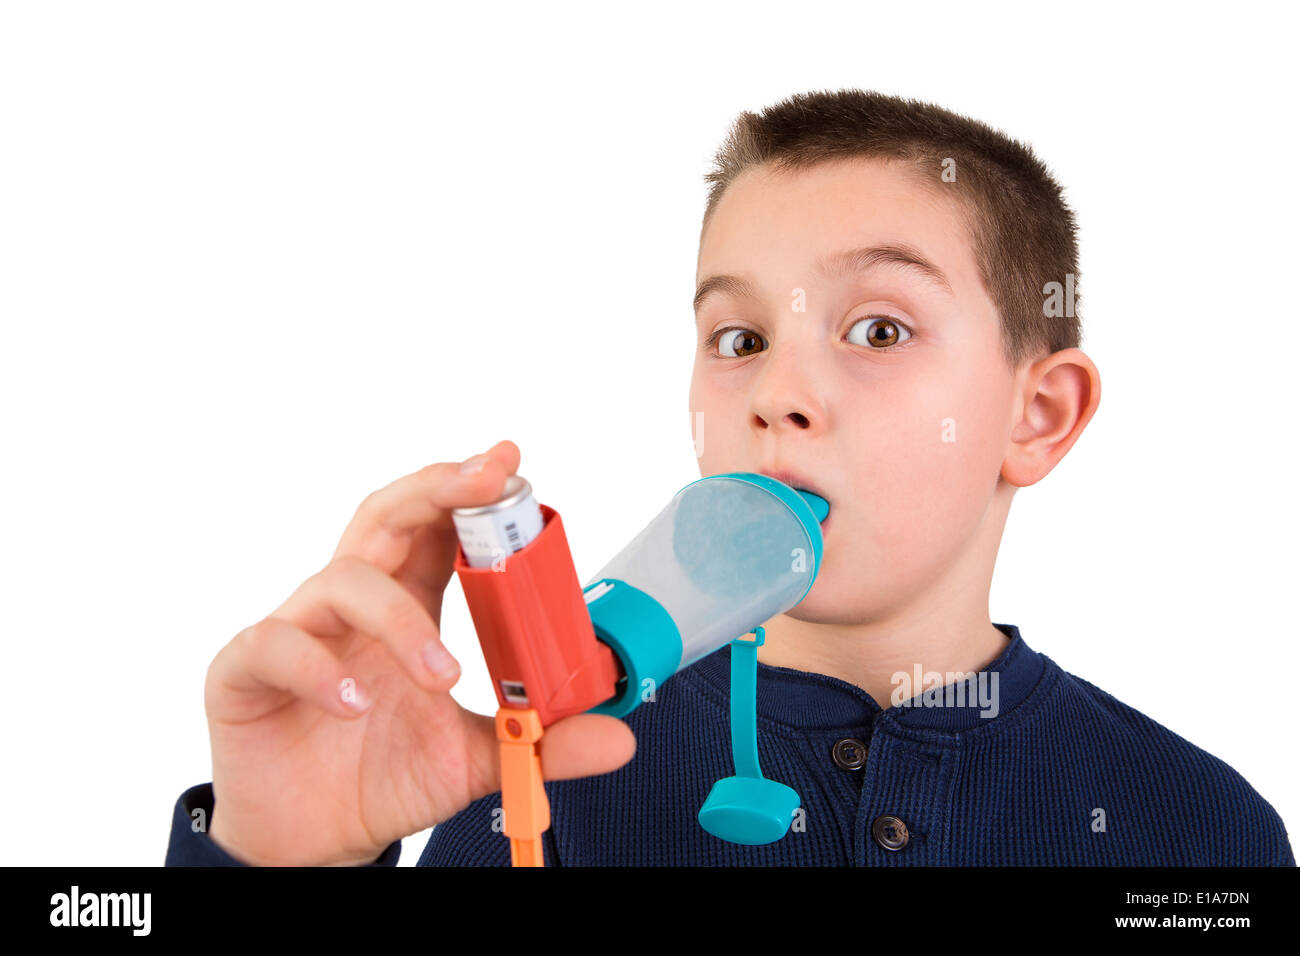 Nine years old kid with allergic asthma, inhaling his medication through spacer while looking at with his wide opened eyes perha Stock Photo